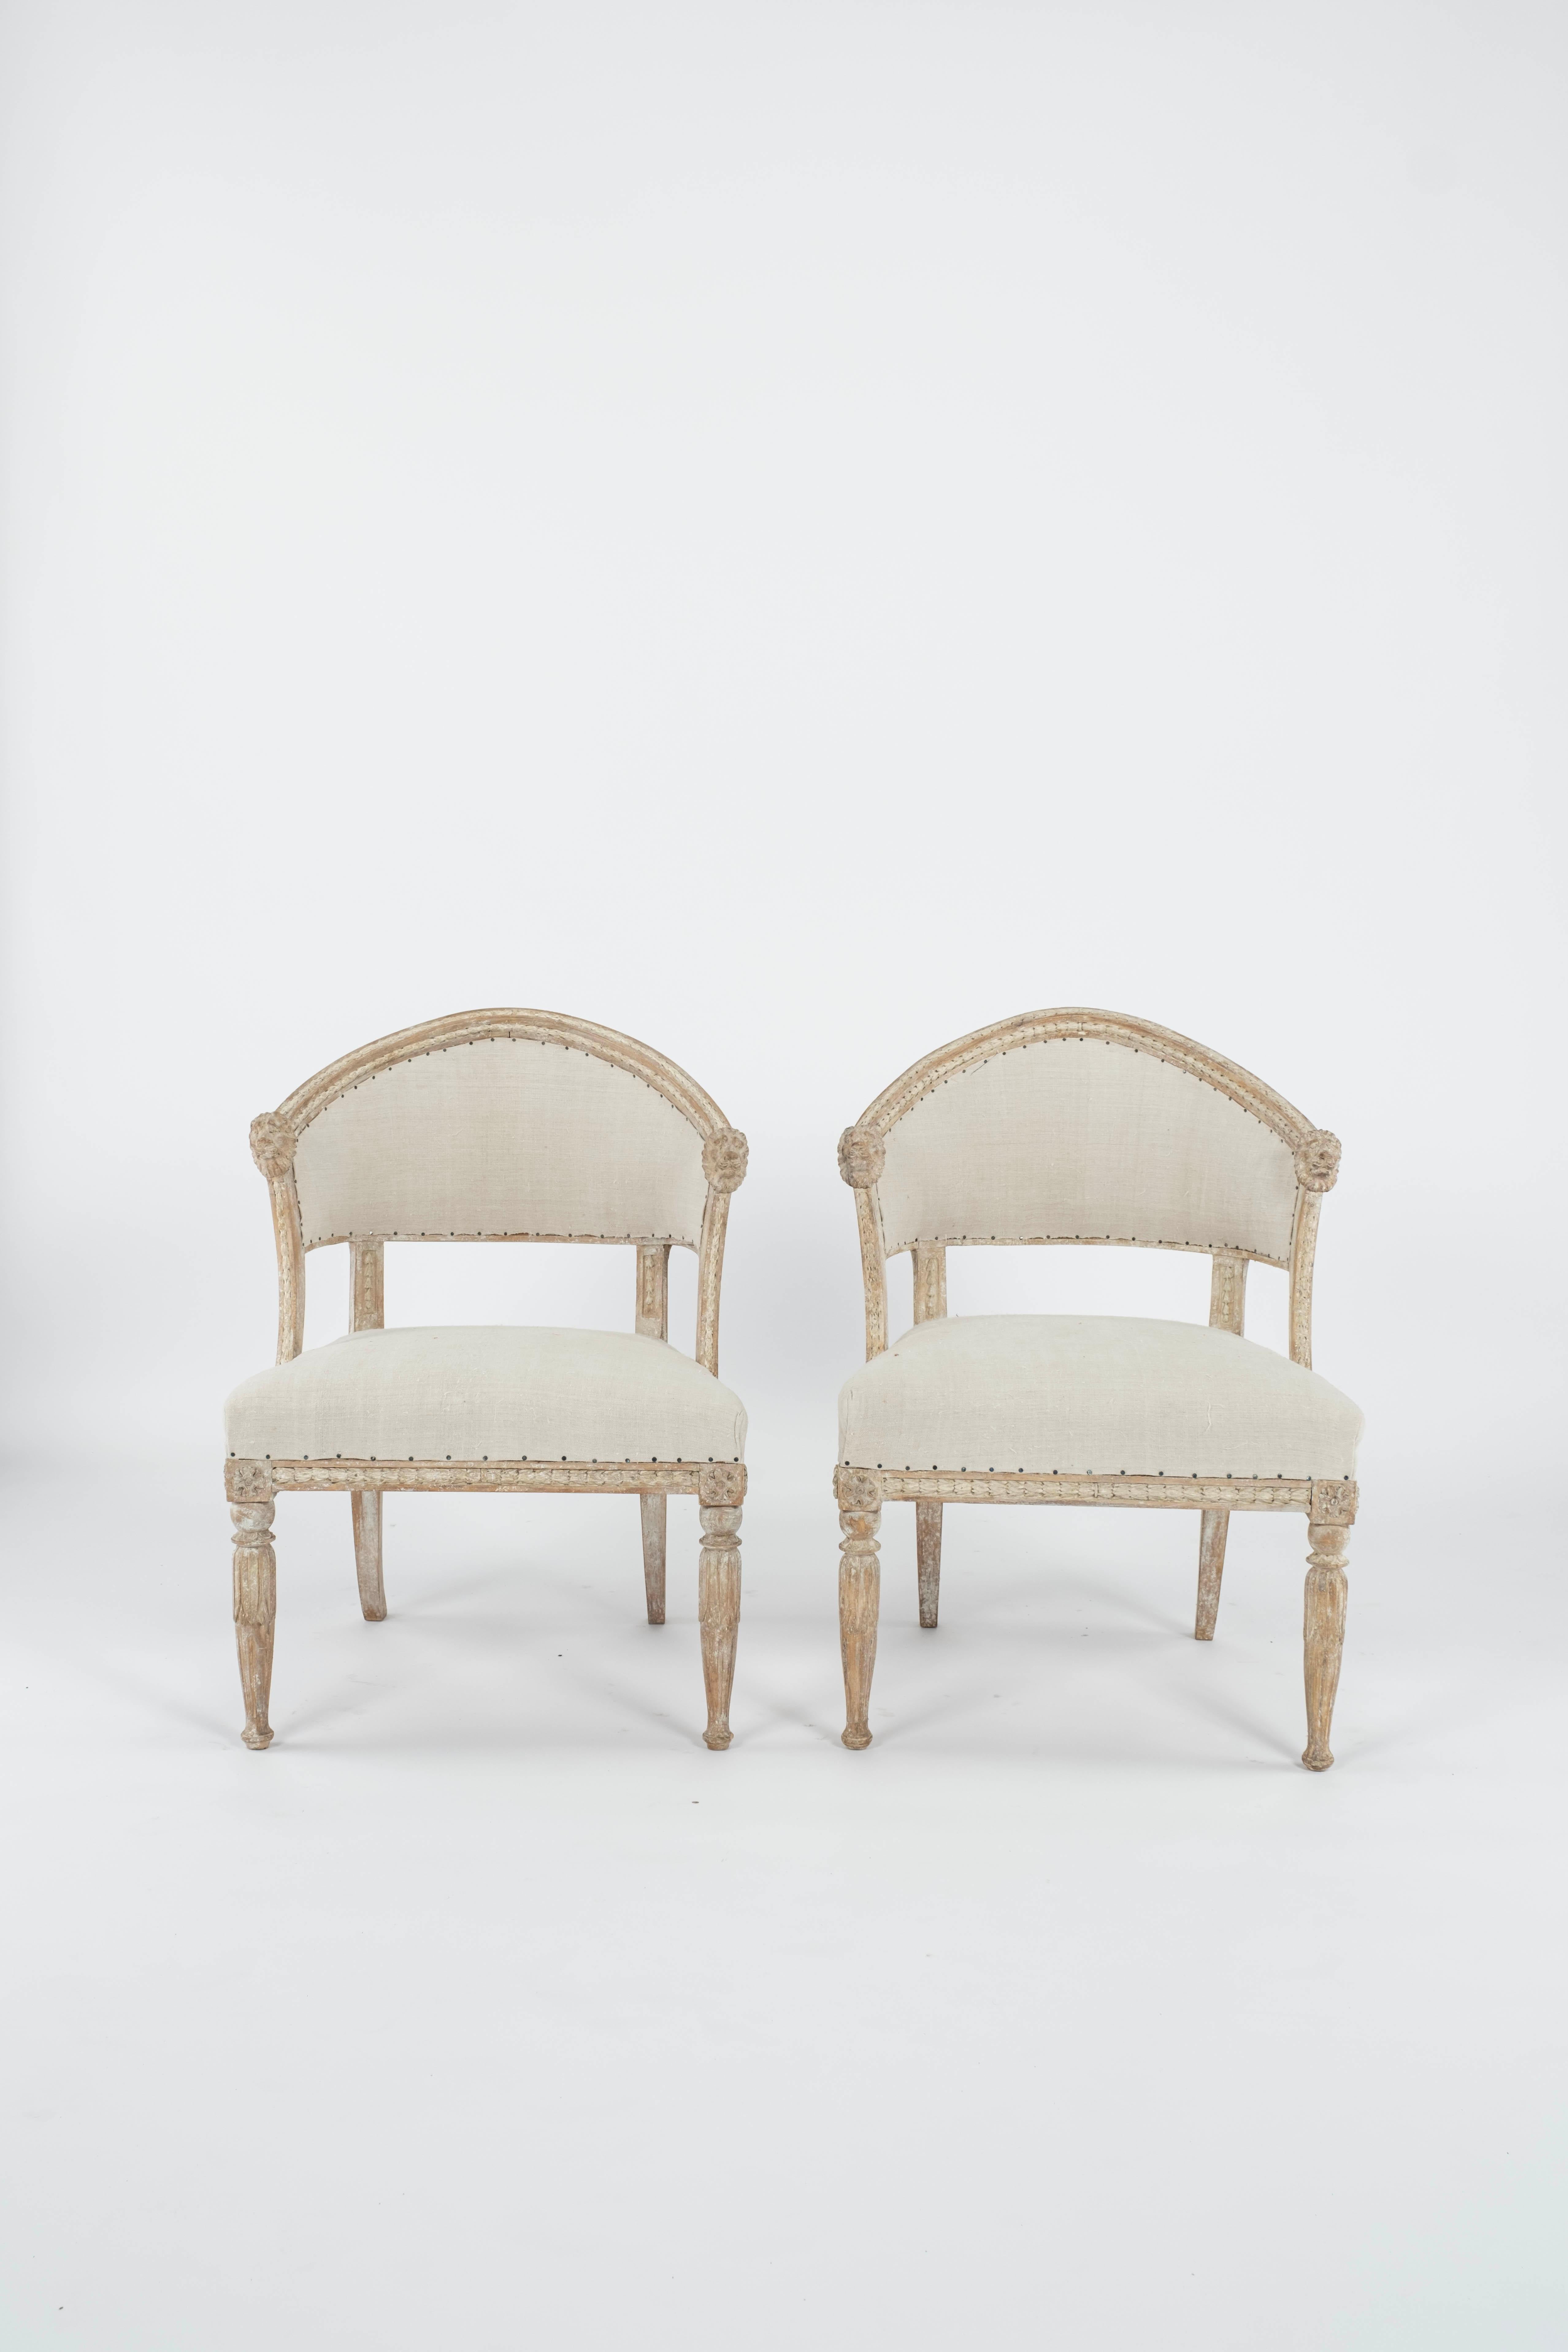 19th Century Pair of 19th C. Swedish Gustavian Barrel Back Chairs For Sale